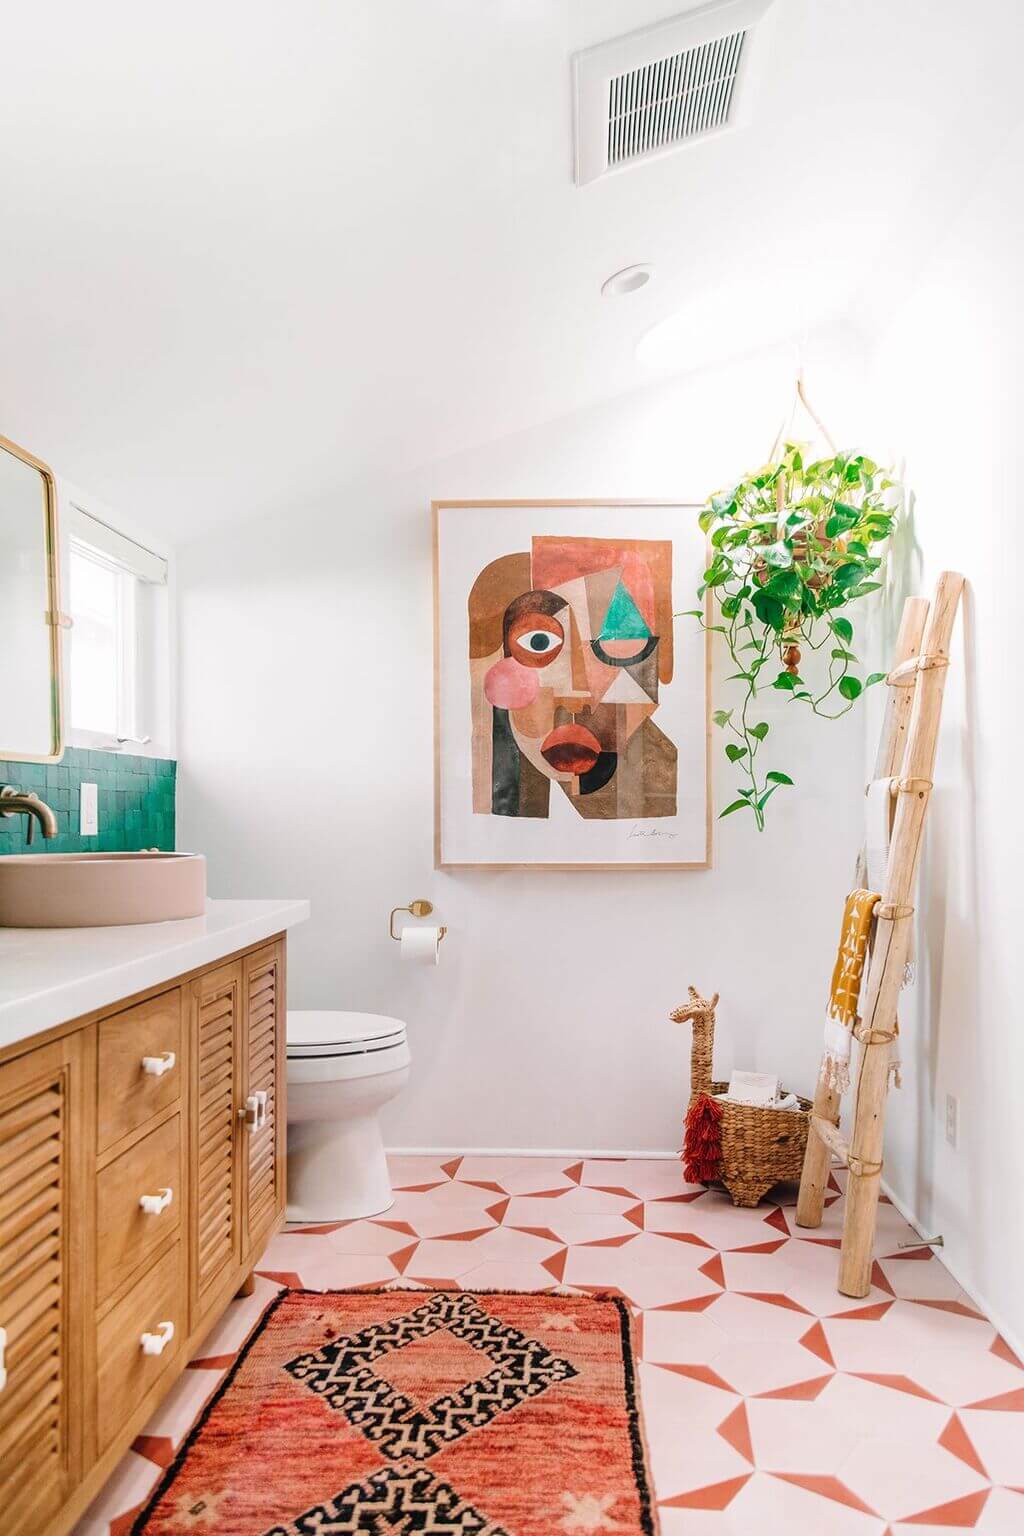 A bathroom with a painting on the wall and a rug on the floor
